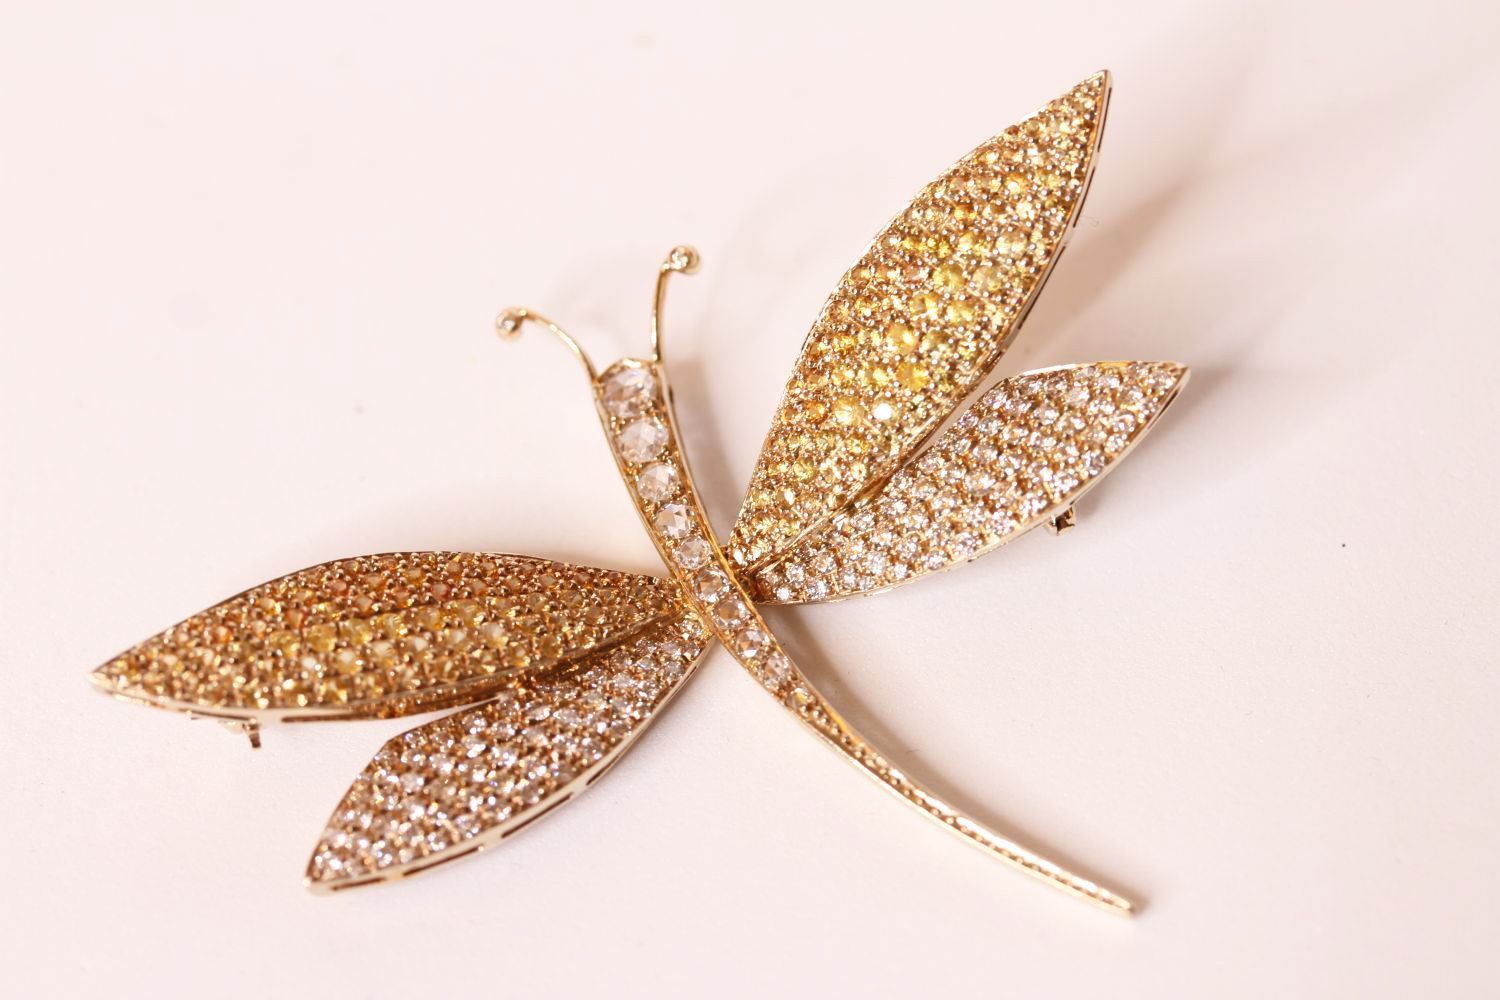 Dragonfly Brooch, pave set with diamonds and yellow sapphires, 67mm x 53mm at widest points, total